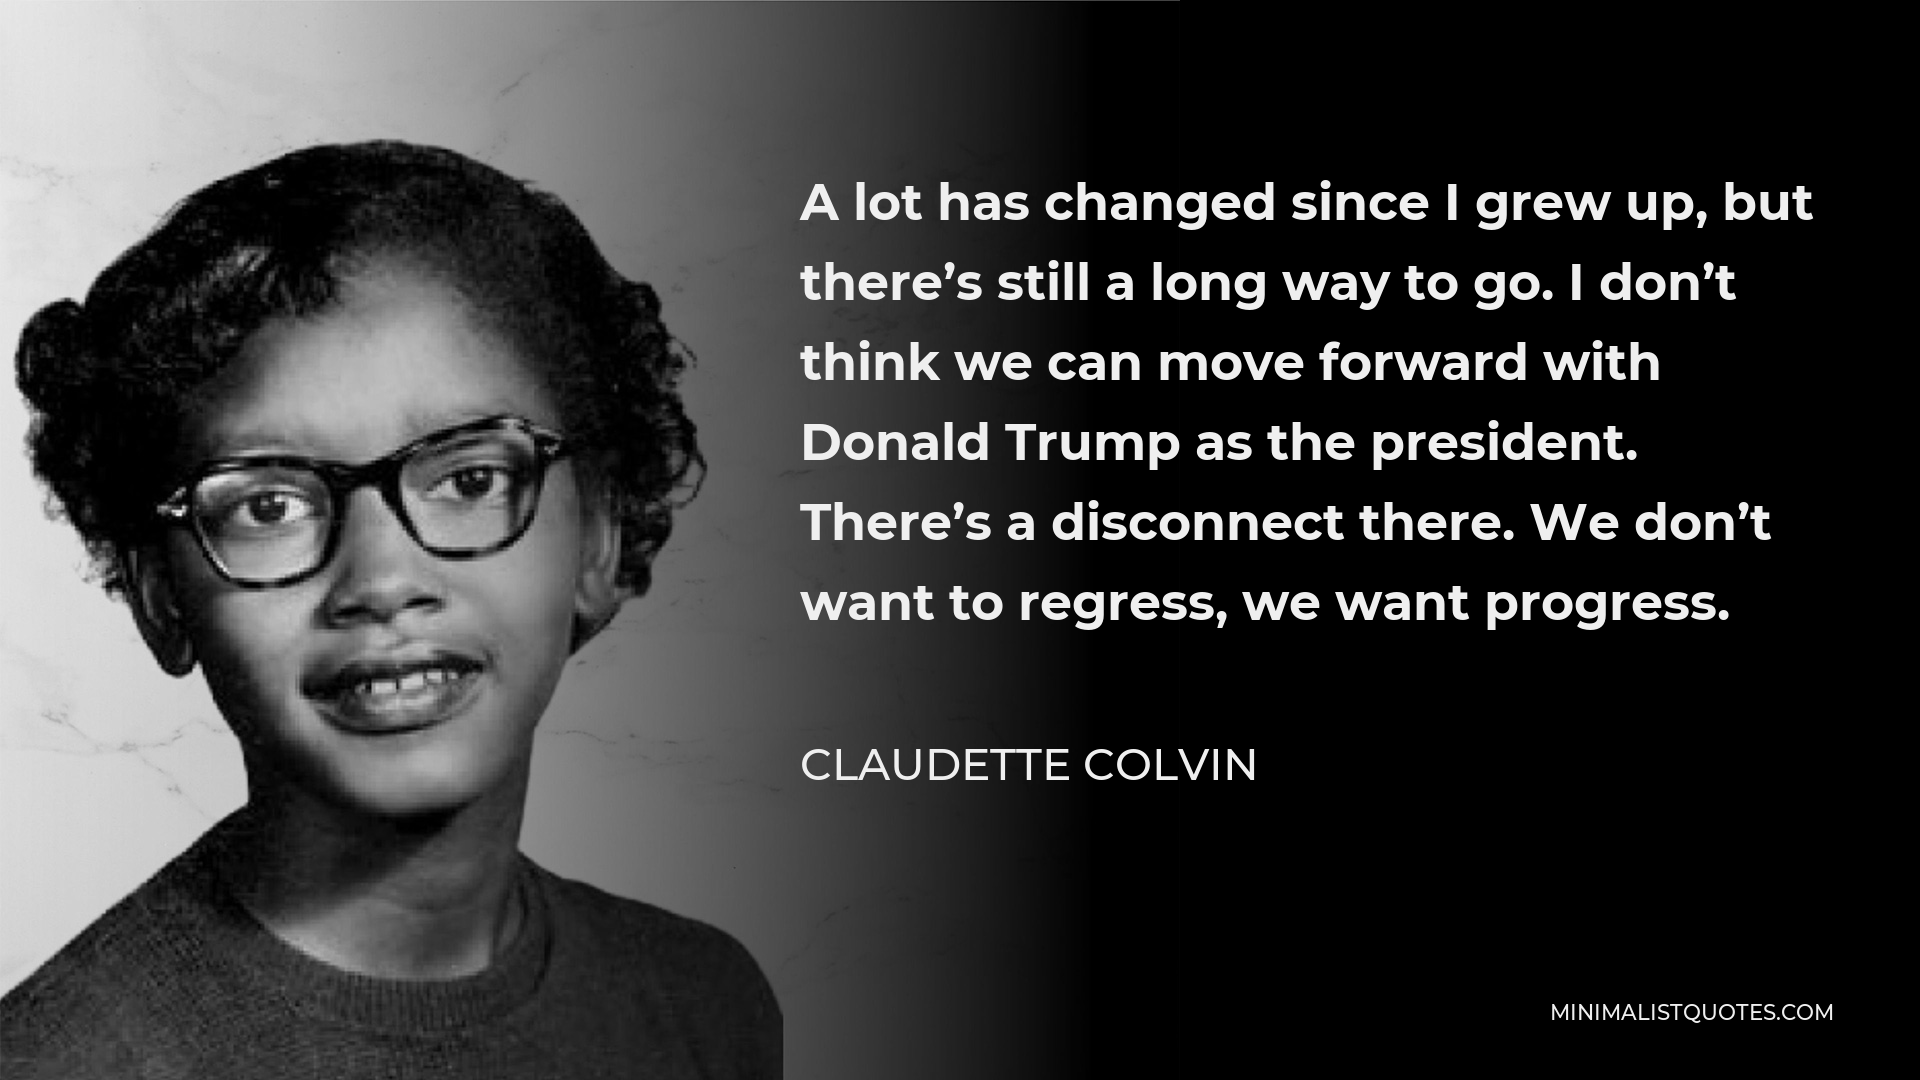 Claudette Colvin Quote - A lot has changed since I grew up, but there’s still a long way to go. I don’t think we can move forward with Donald Trump as the president. There’s a disconnect there. We don’t want to regress, we want progress.